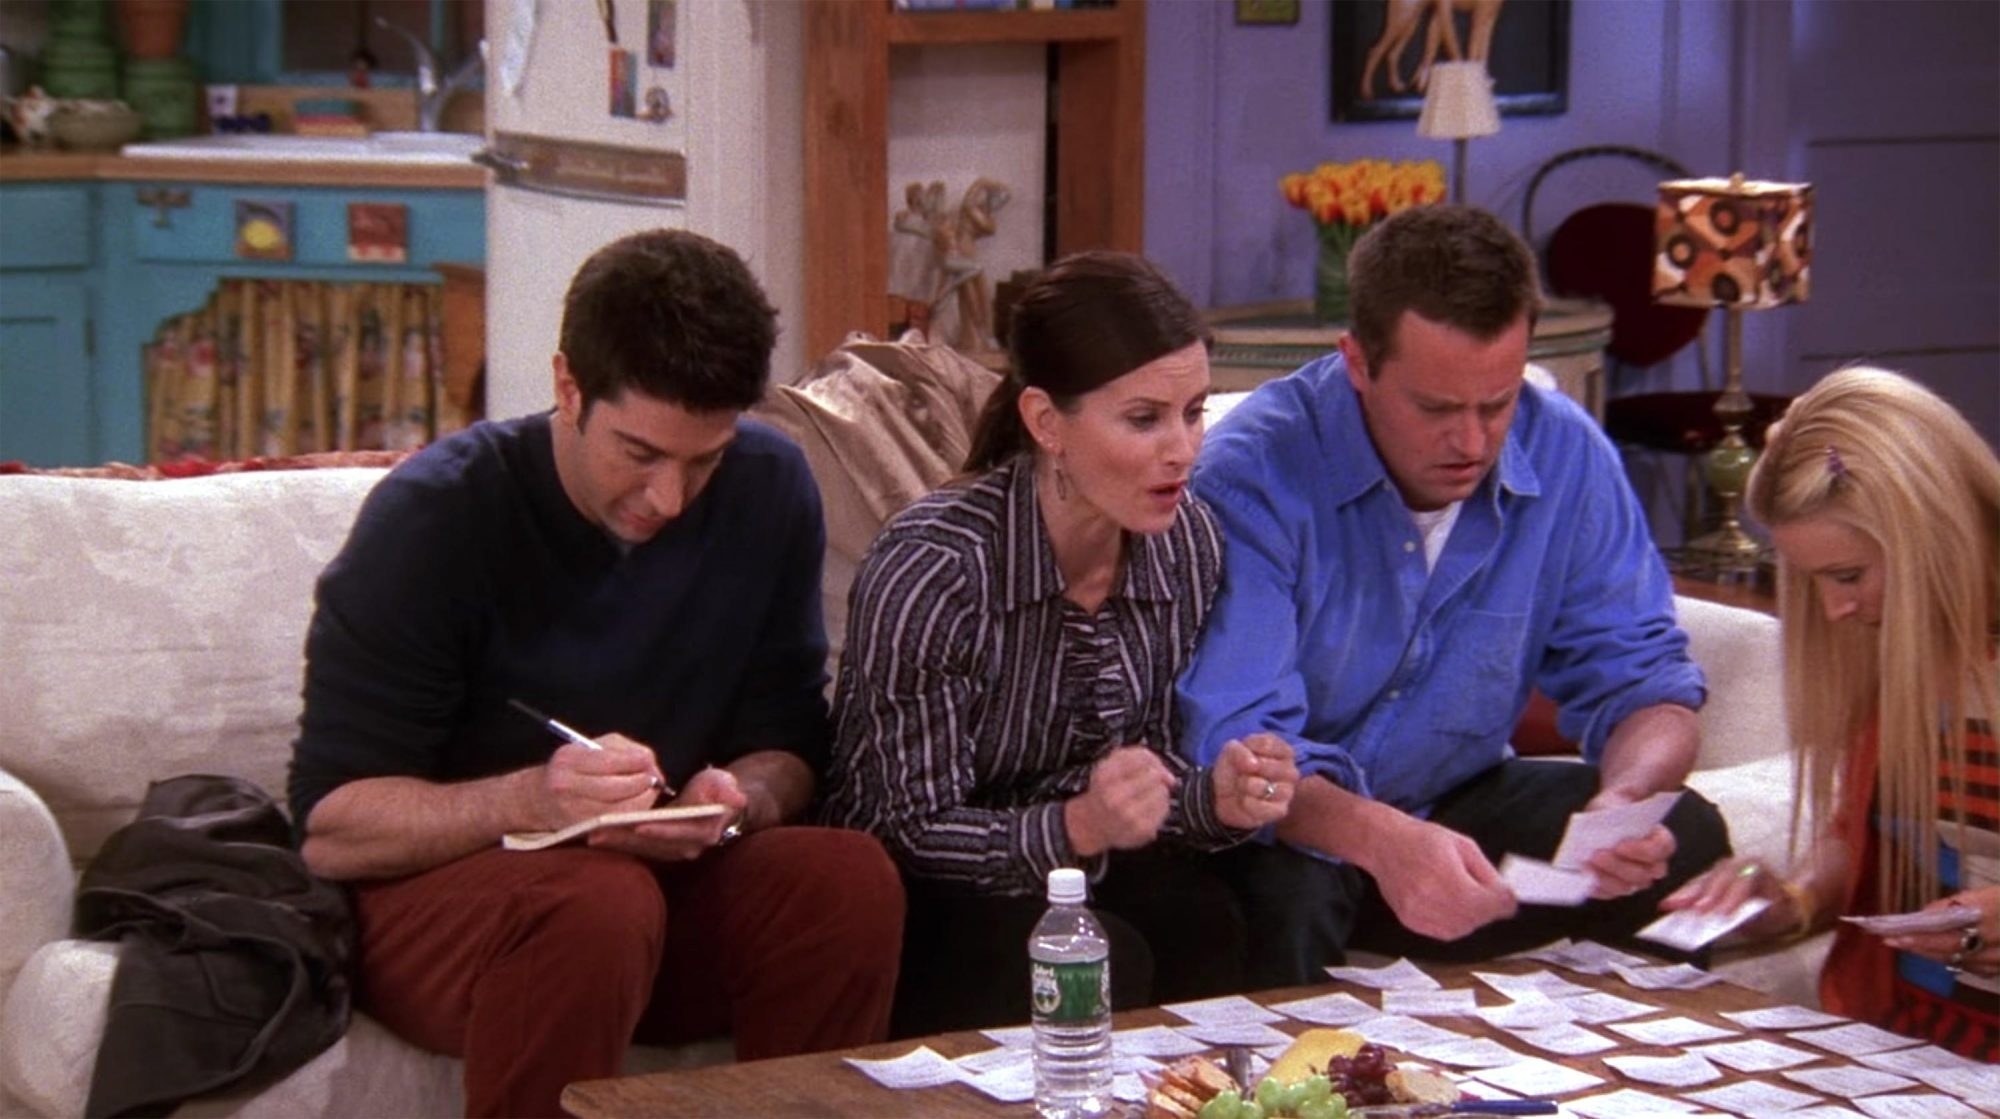 Ross writes on a notepad, Monica cheers, and Chandler and Phoebe lay out several lottery tickets on a coffee table